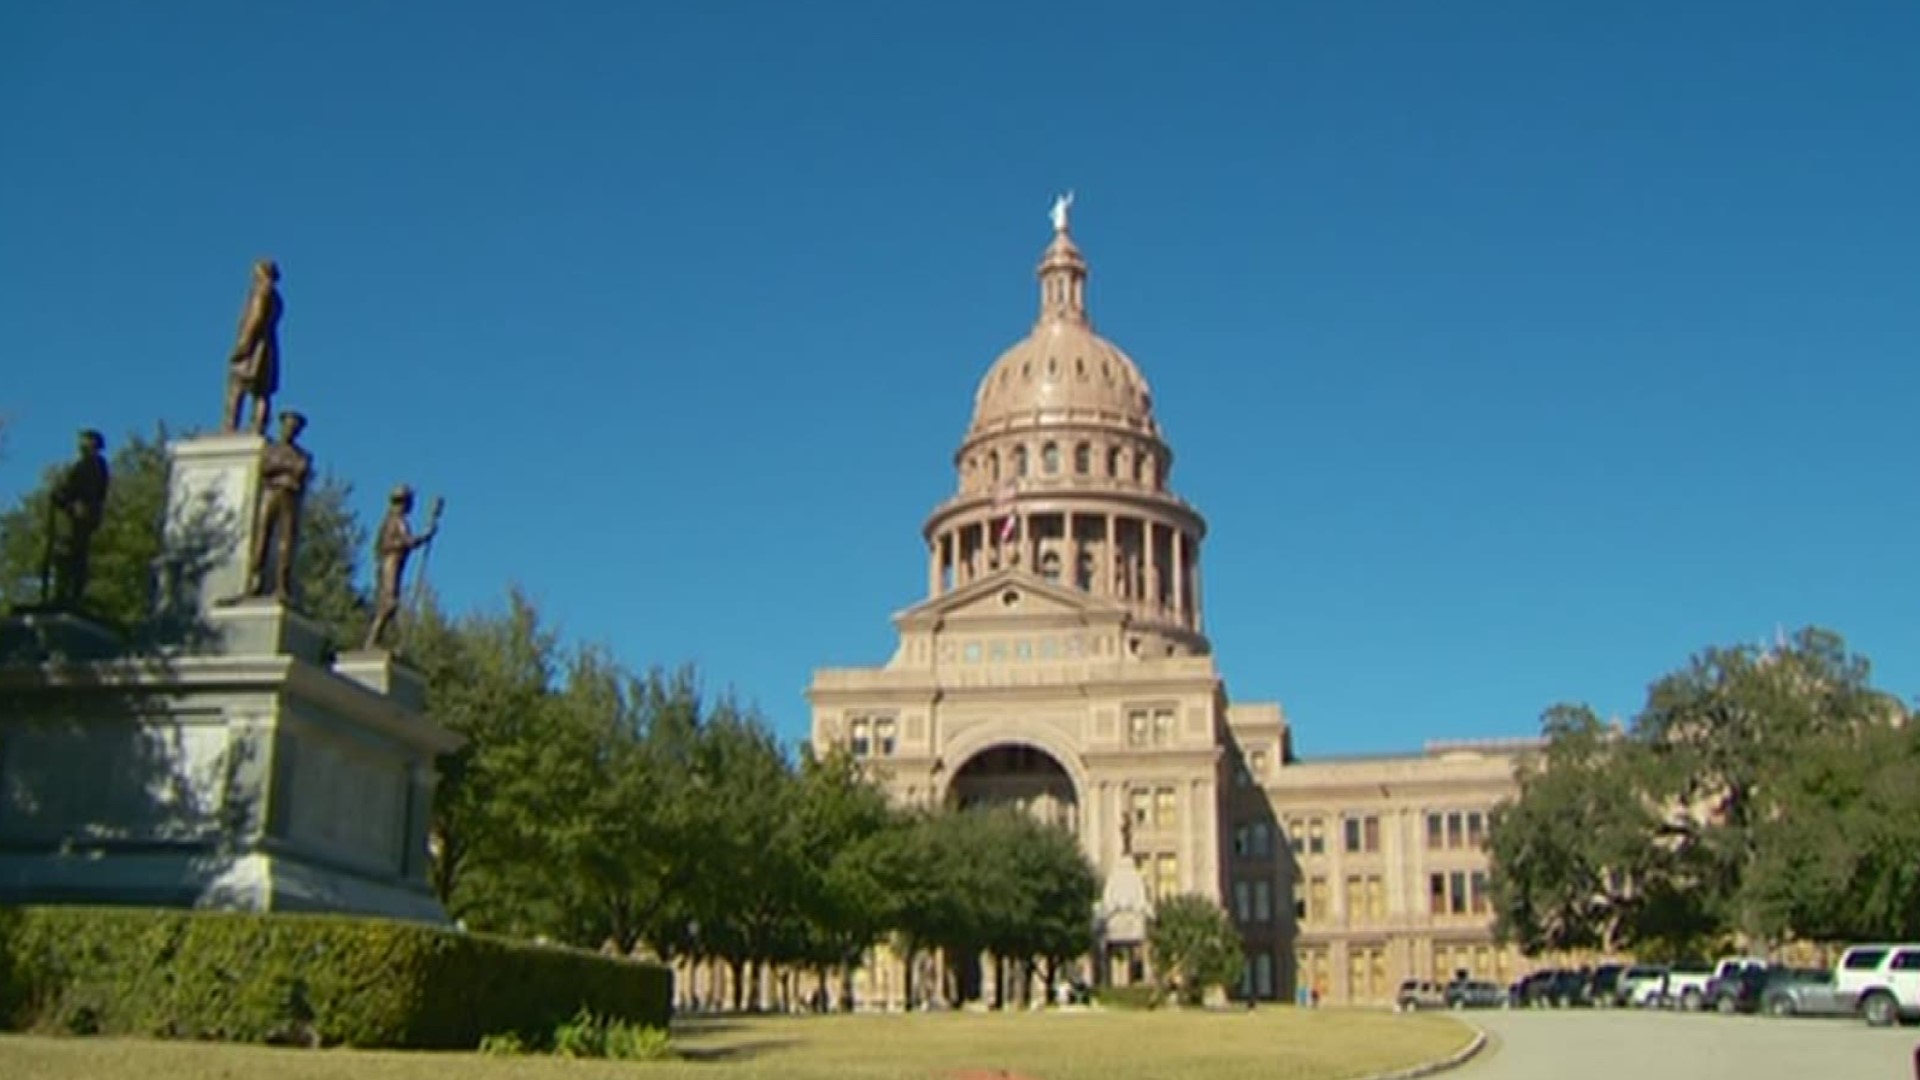 With the Texas legislature in full swing now, dockless scooter riders should heed a rule on the grounds of the Texas State Capitol.